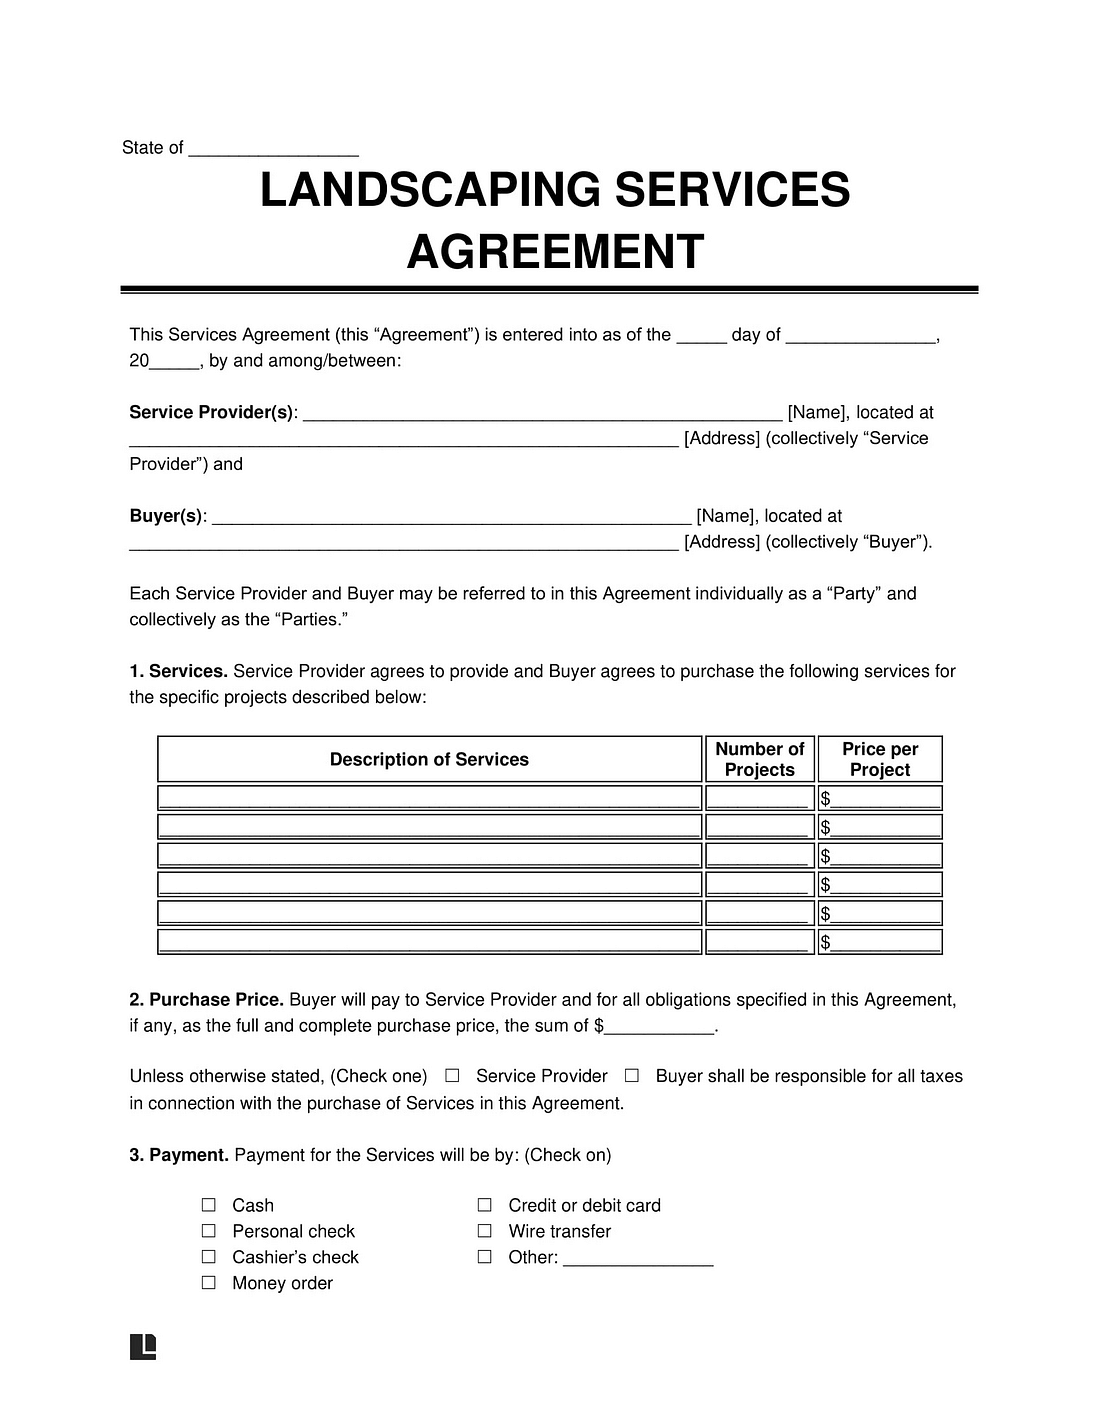 landscaping services agreement